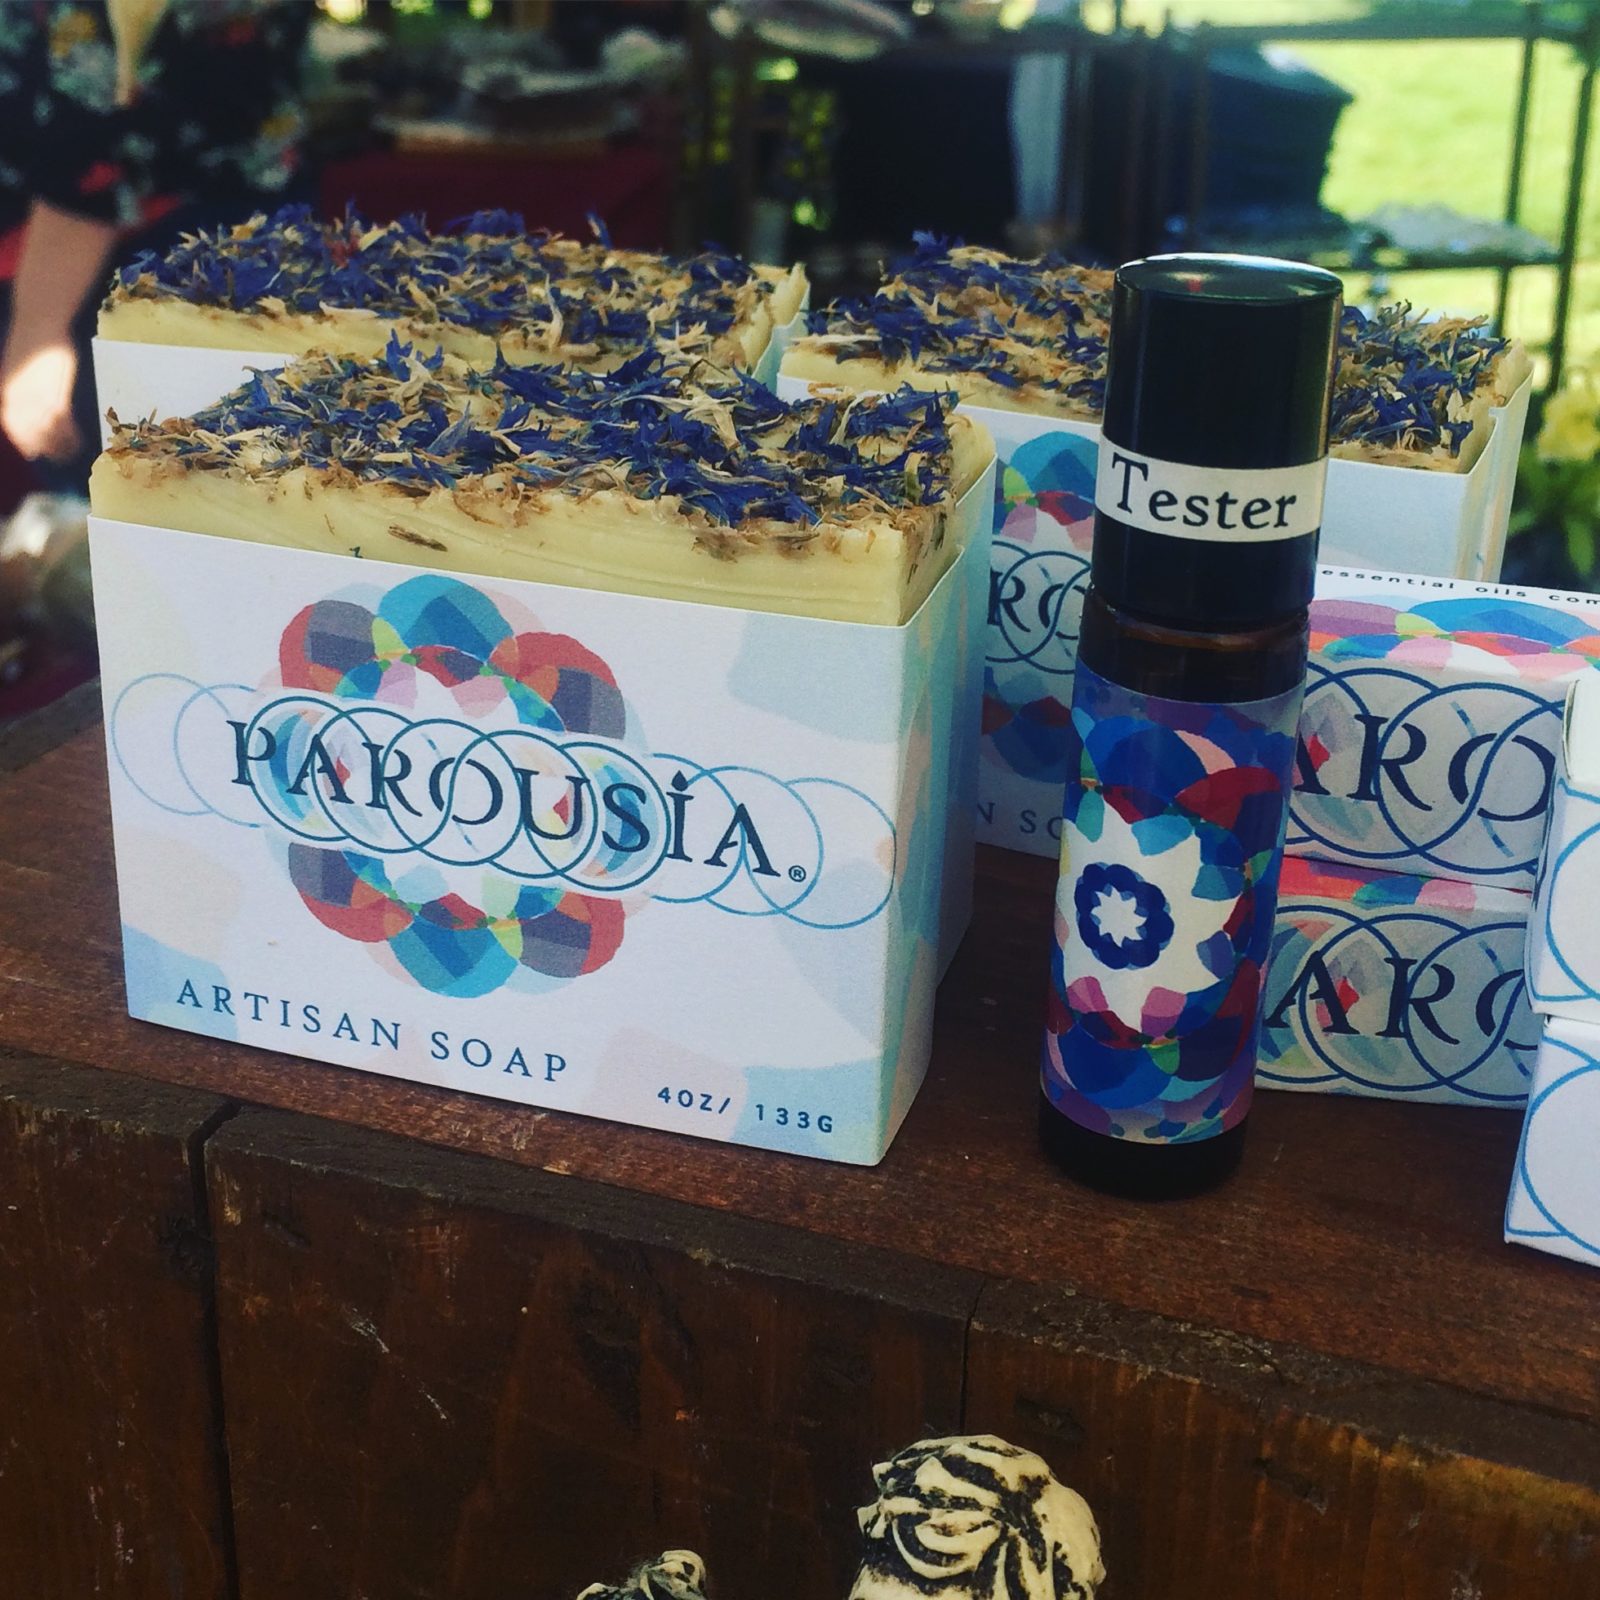 Parousia Perfume at Founders Day Festival in Dripping Springs Texas